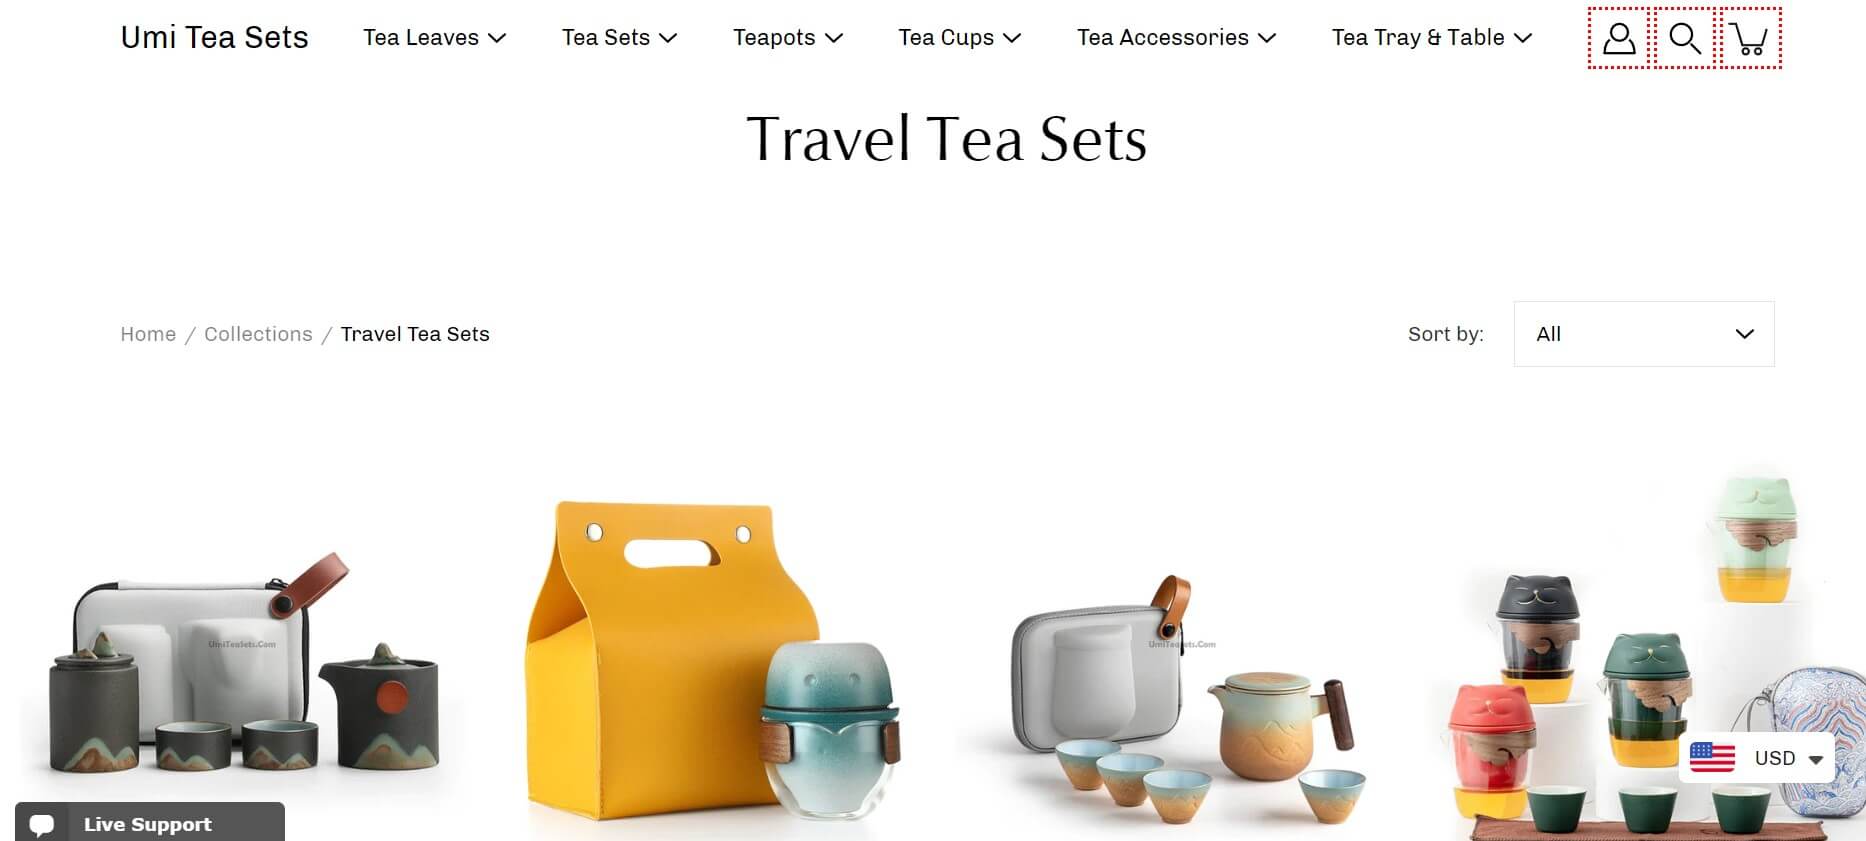 Umi travel tea set collections in their website's catalog. 